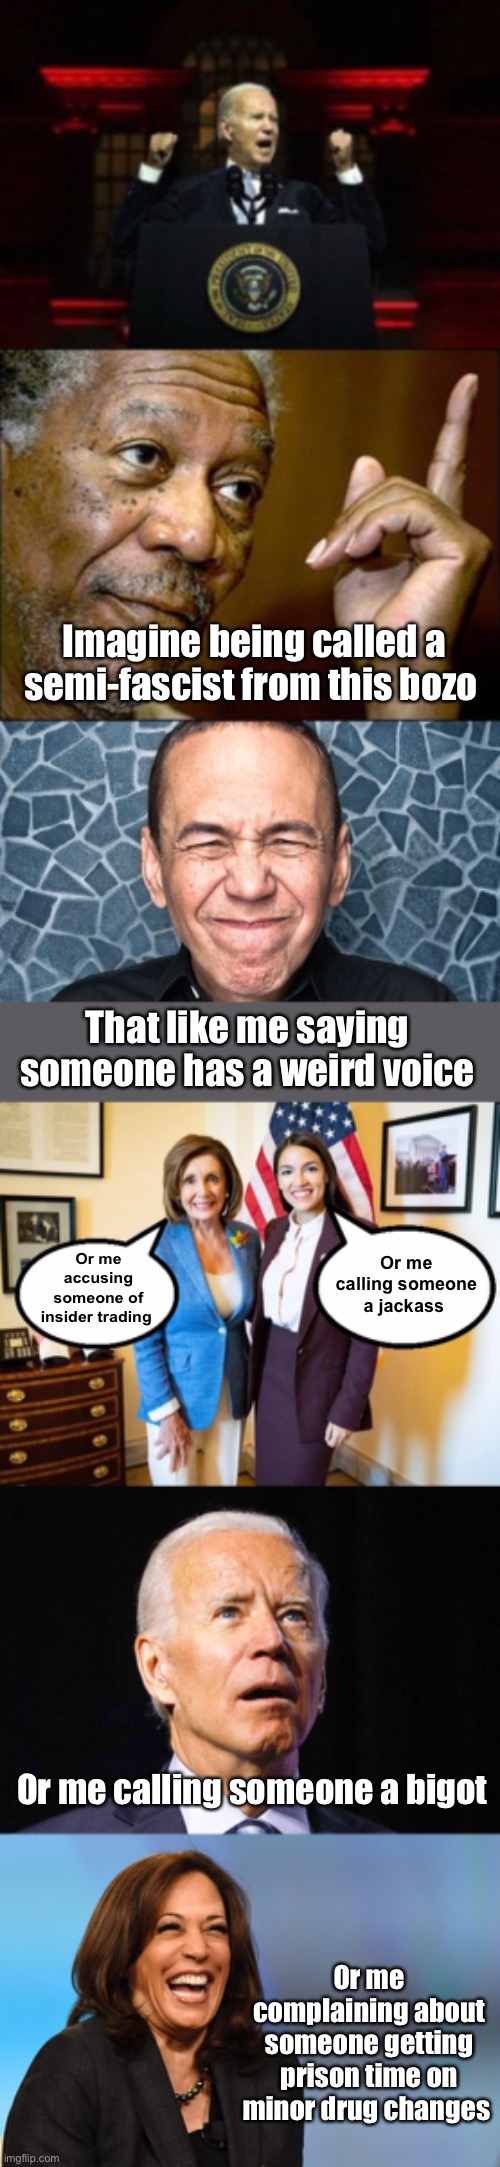 Oh the irony | Imagine being called a semi-fascist from this bozo; That like me saying someone has a weird voice; Or me calling someone a jackass; Or me accusing someone of insider trading; Or me calling someone a bigot; Or me complaining about someone getting prison time on minor drug changes | image tagged in this morgan freeman,gilbert gottfried,nancy pelosi and aoc,joe biden,kamala harris laughing,politics lol | made w/ Imgflip meme maker